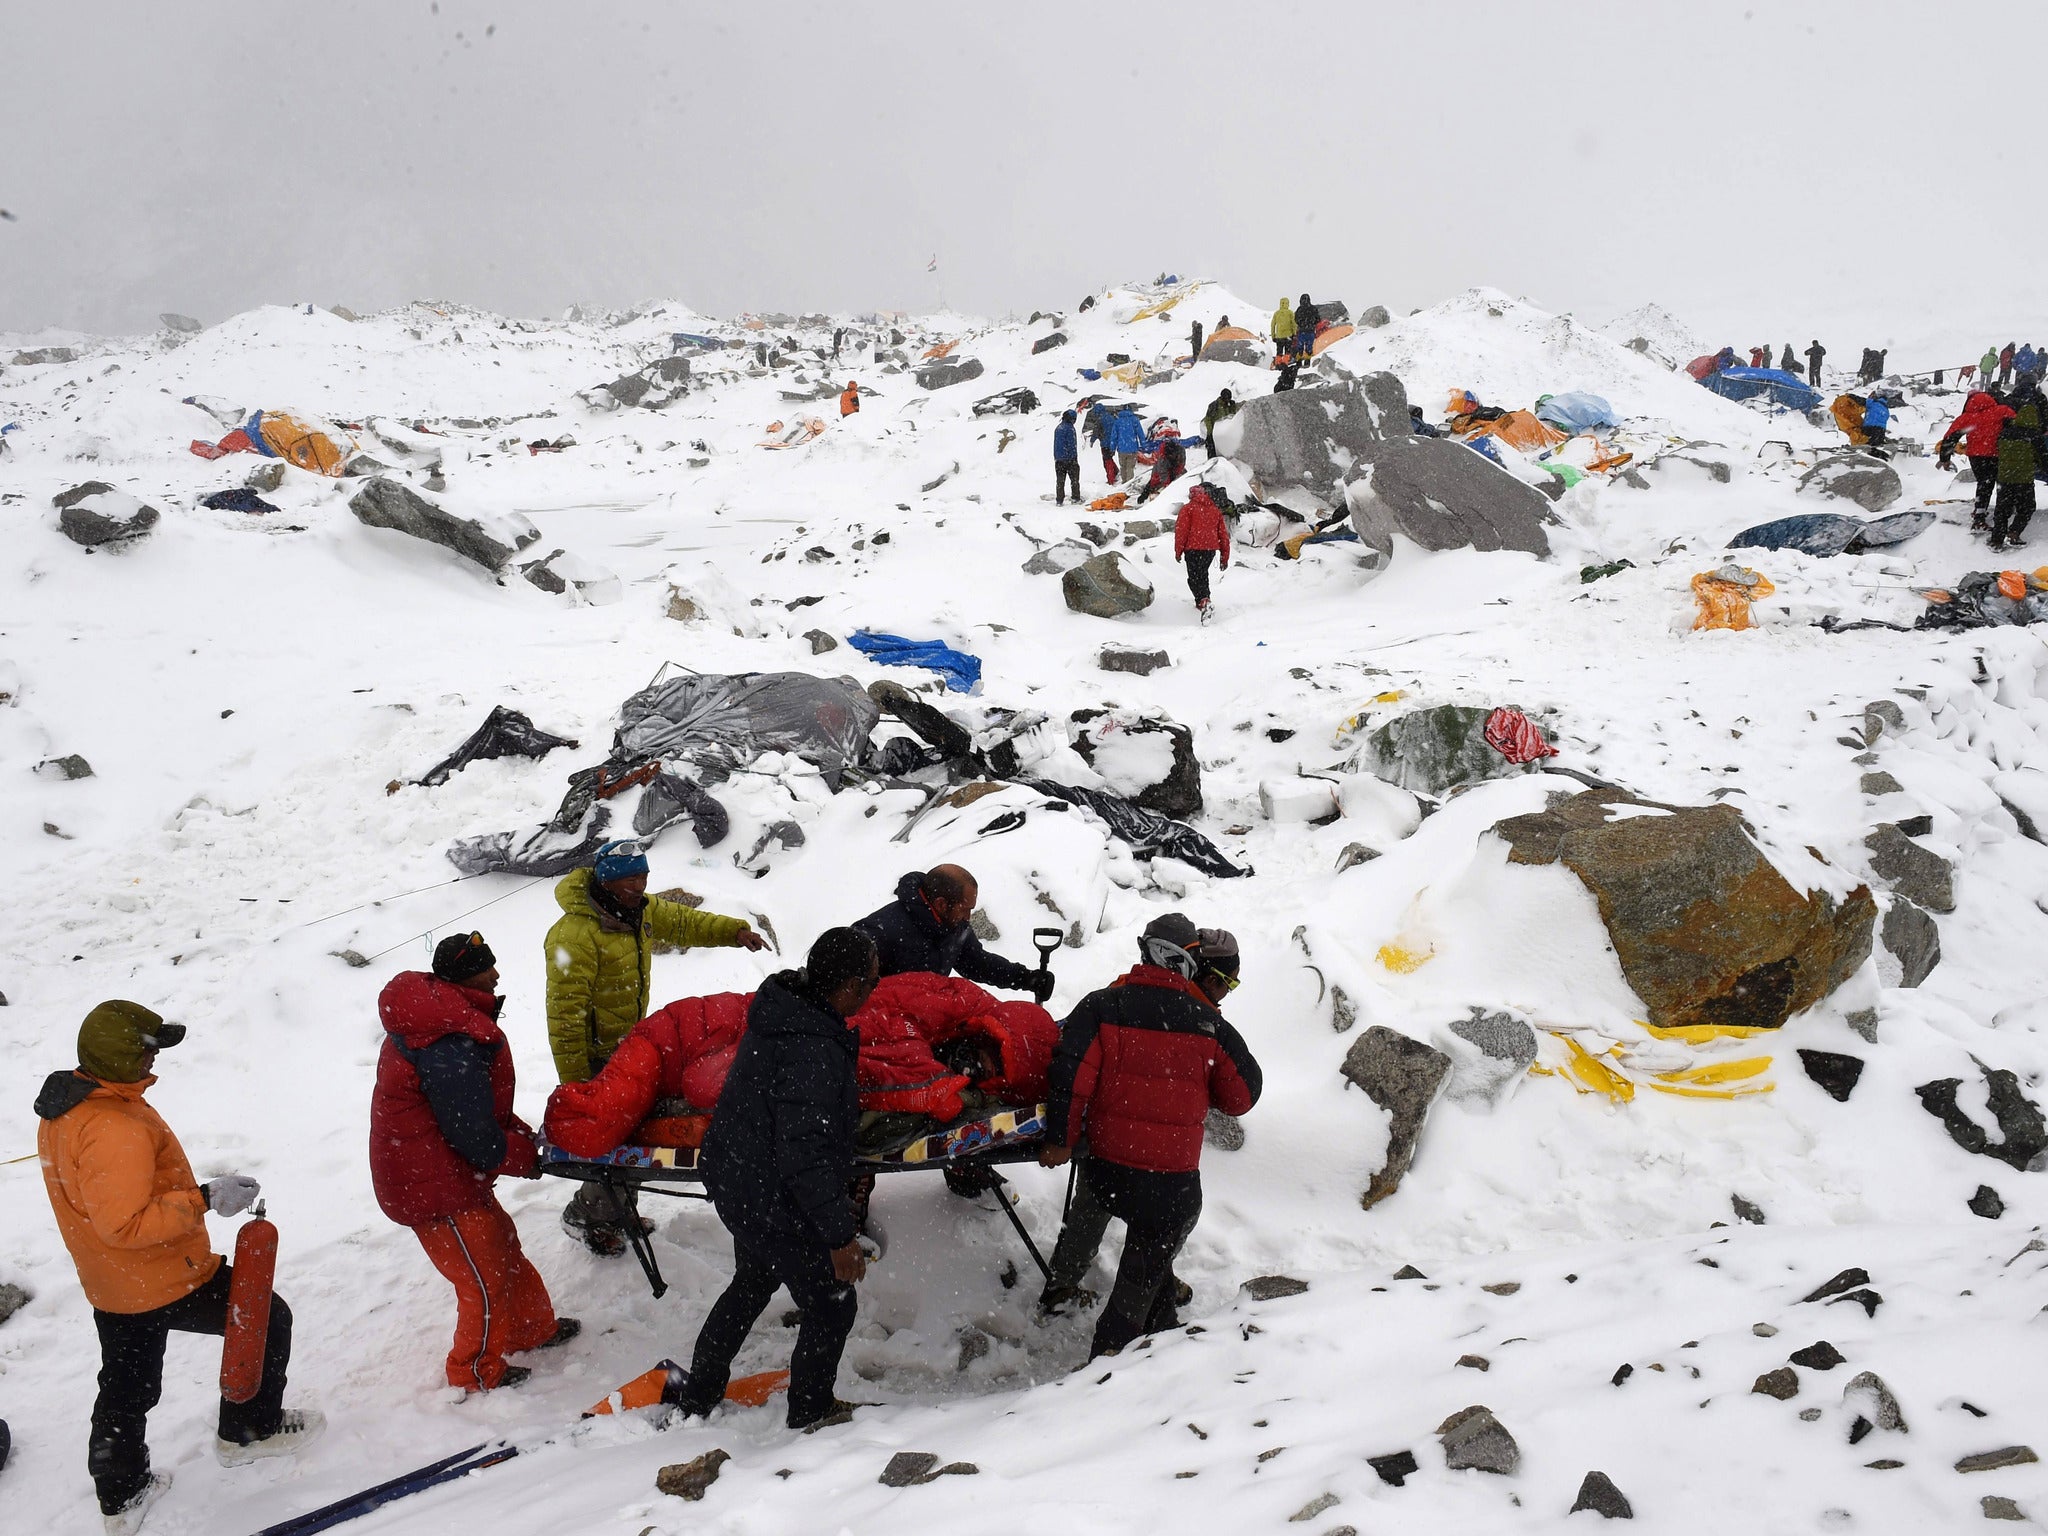 At least 17 people died on Everest after an avalanche struck, triggered by the earthquake